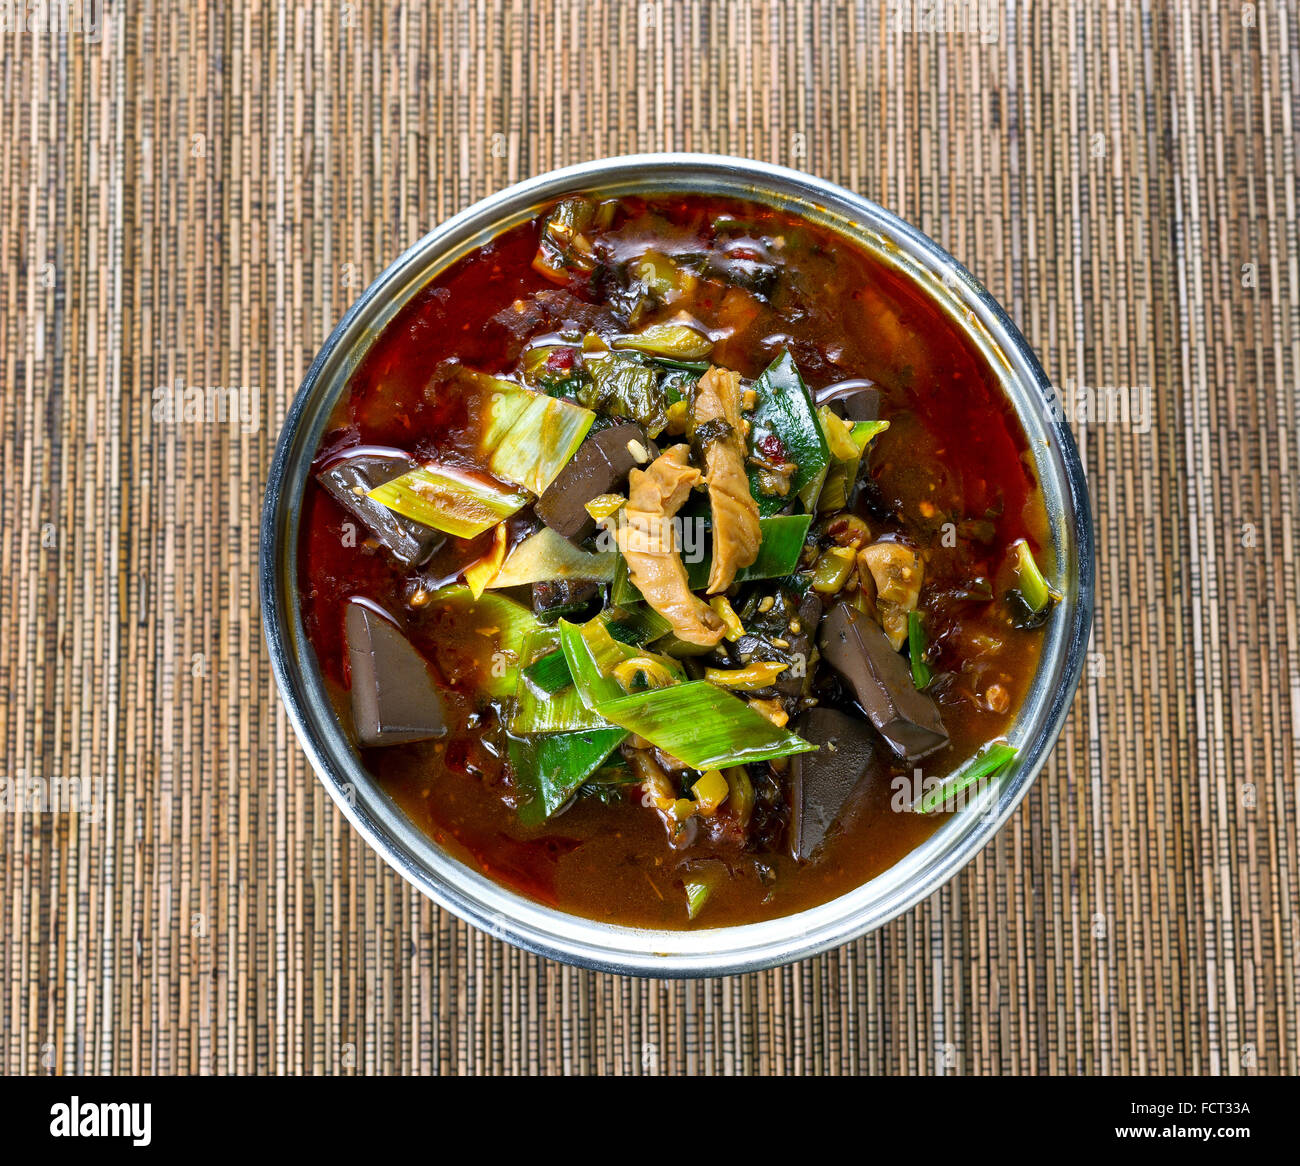 High angled view of a cooking pot filled with vegetables, spicy pepper sauce and tofu for soup dinner on bamboo mat. Stock Photo